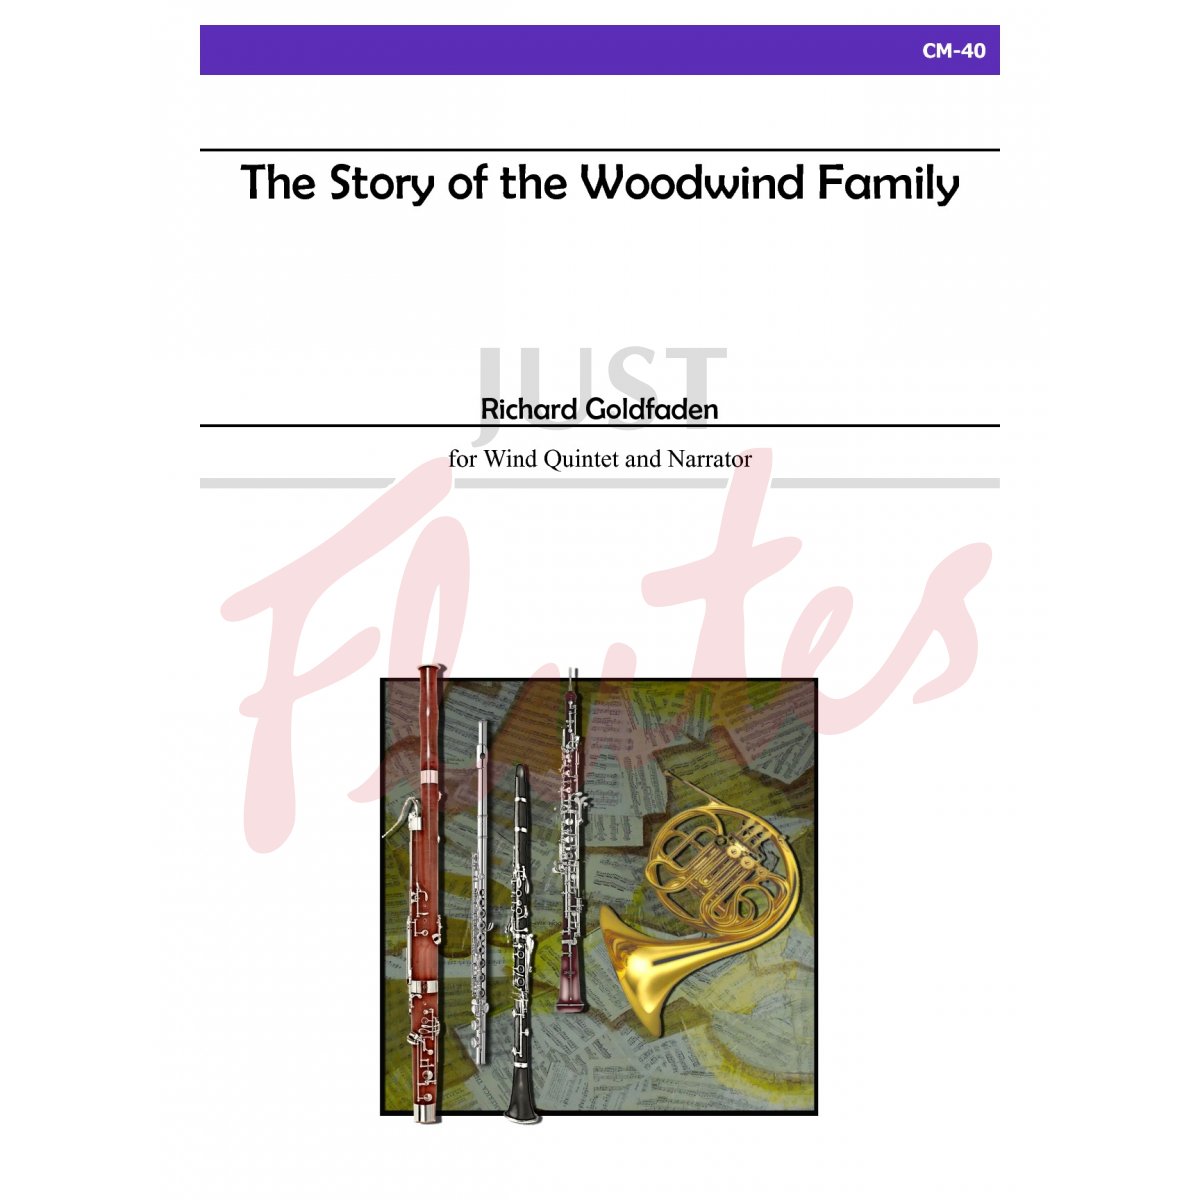 The Story of the Woodwind Family